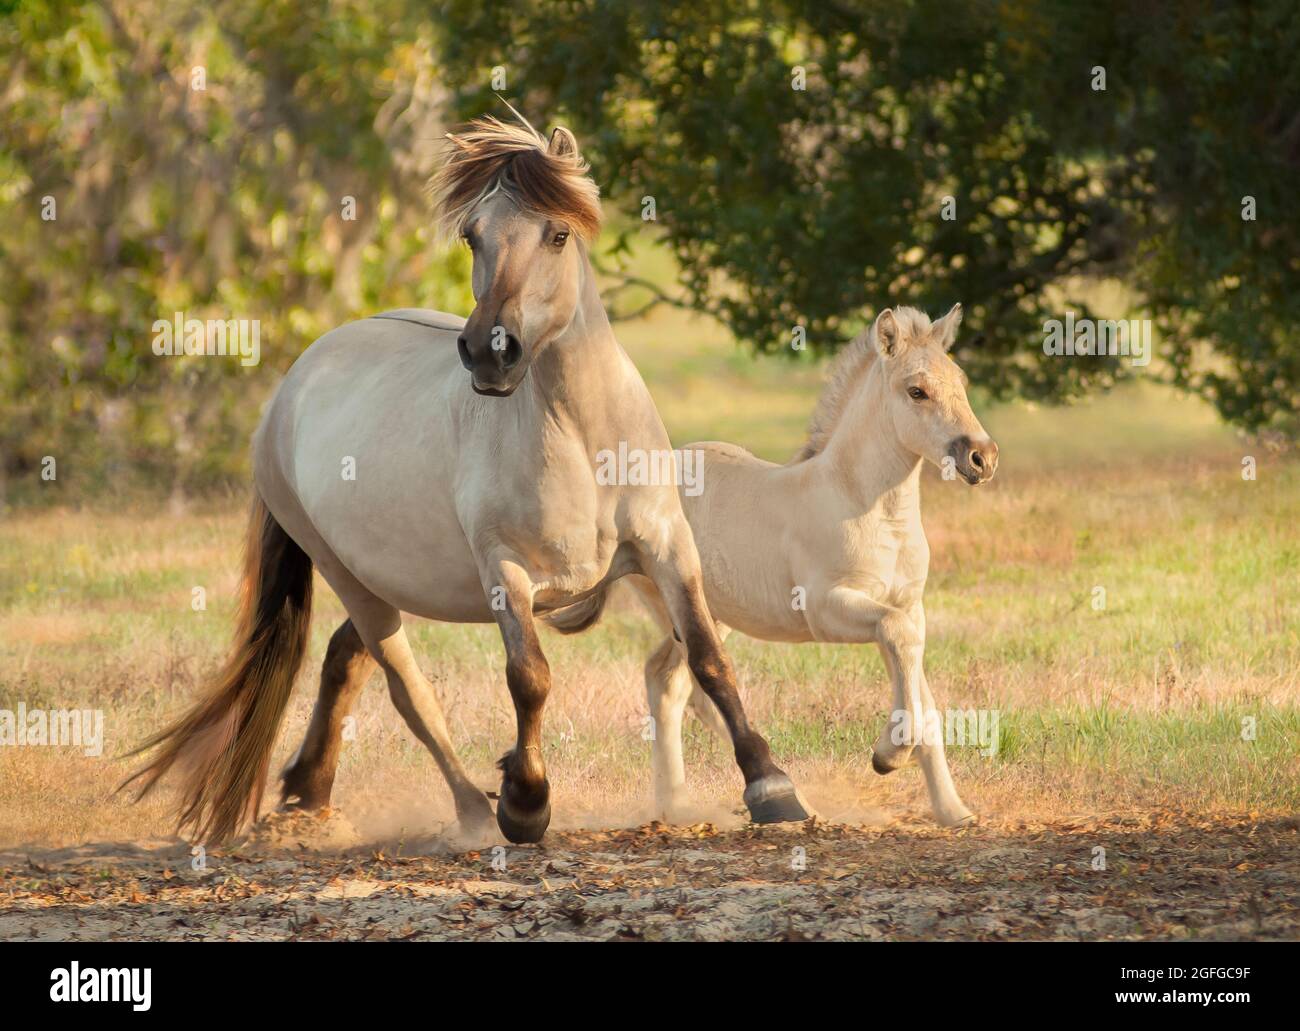 Norwegian Fjord mare with one month old foal at side Stock Photo